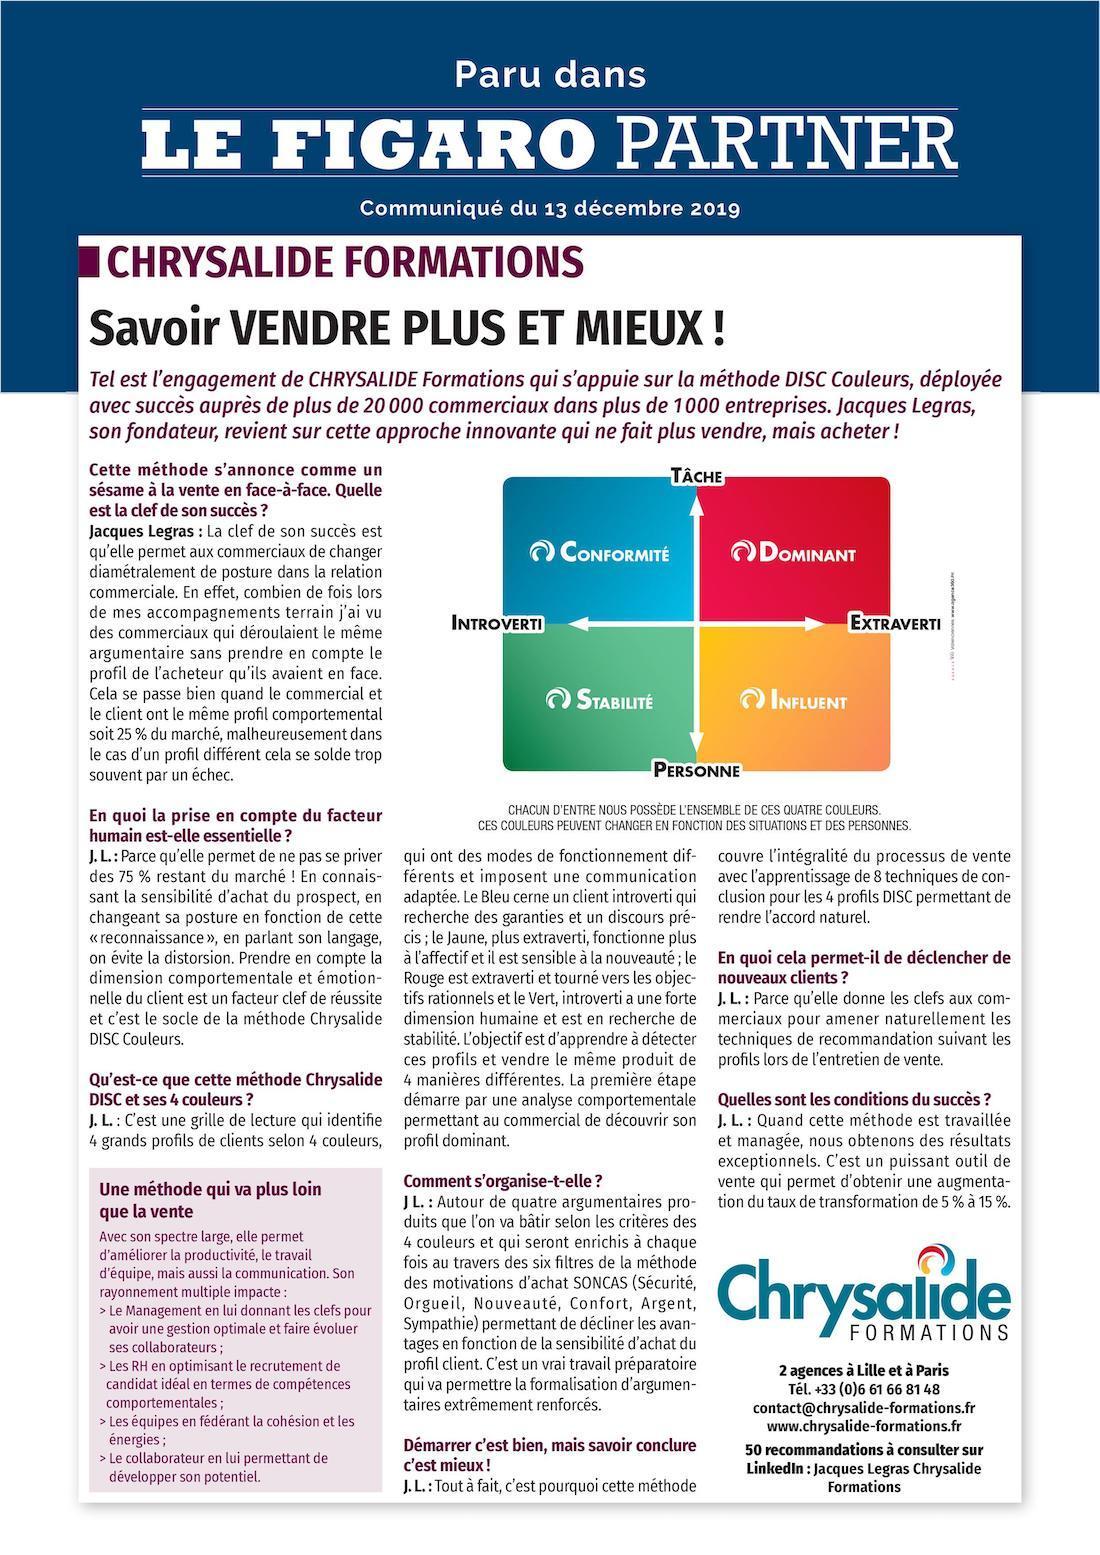 Chrysalide Formations Figaro Partner Décembre 2019